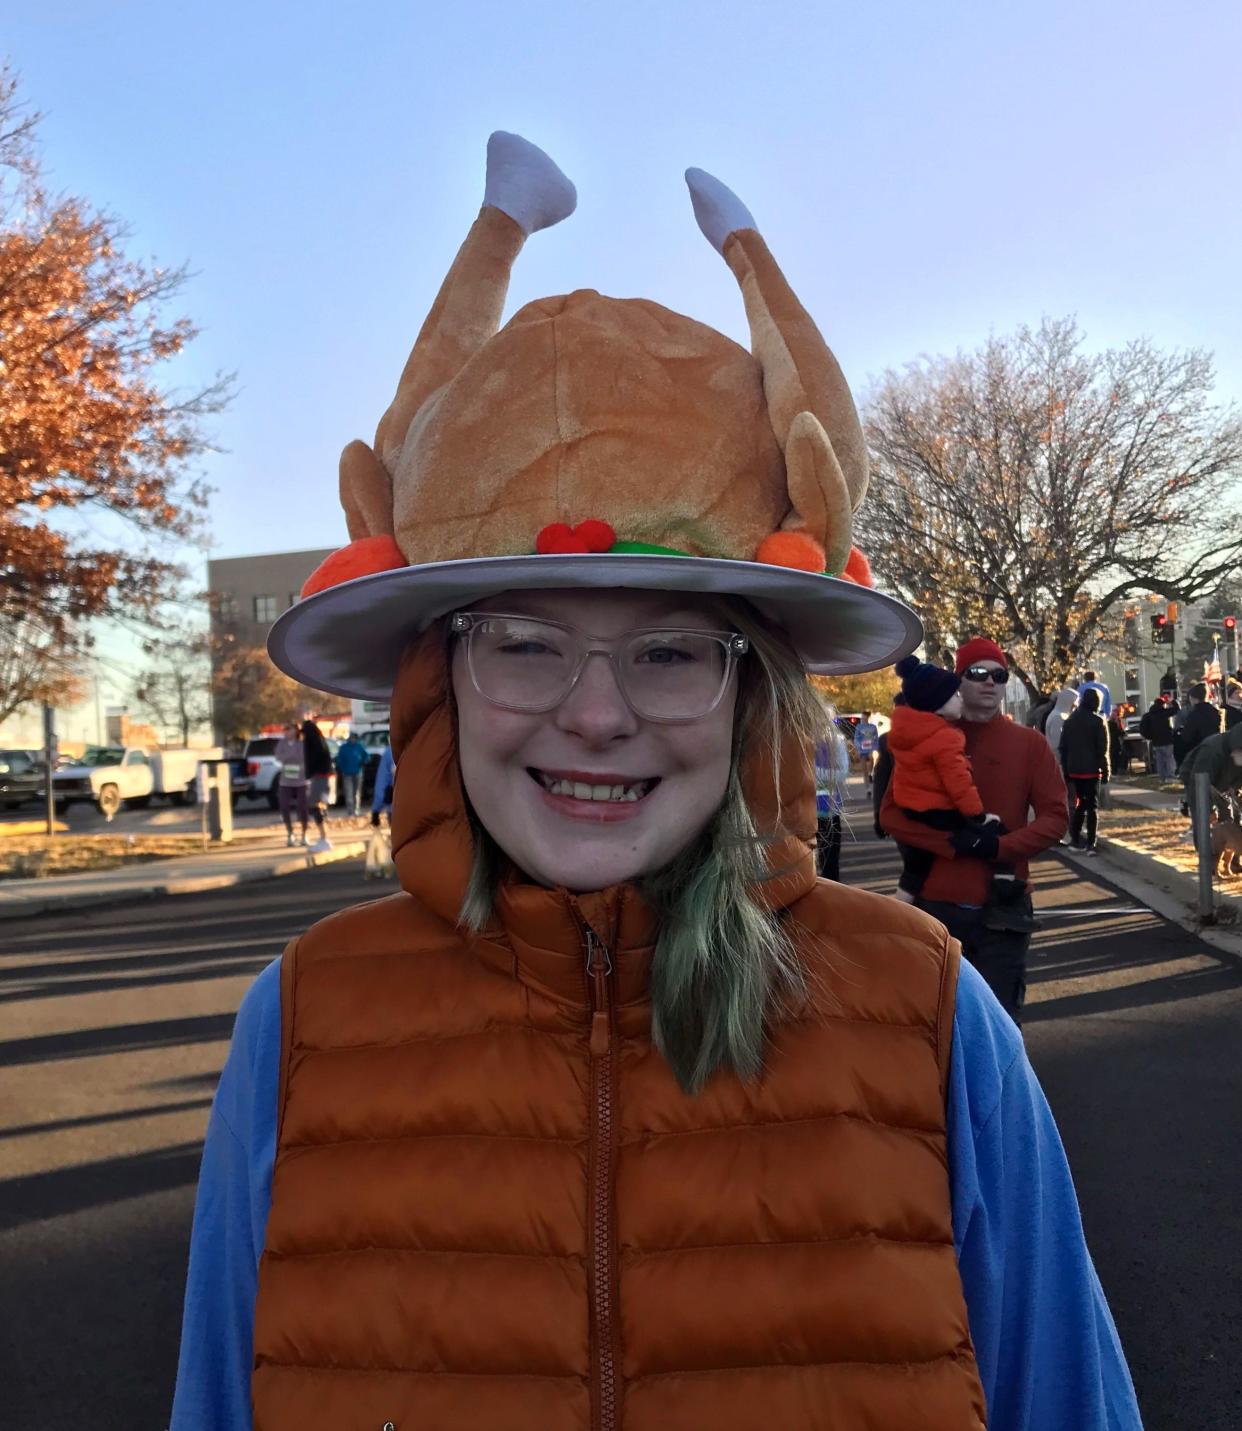 Willa Thieme, a student at Springfield's Sequiota Elementary, entered the Thanksgiving Day Turkey Trot 5K Run/Walk for the first time. She participated with her grandmother, grandfather and aunt.